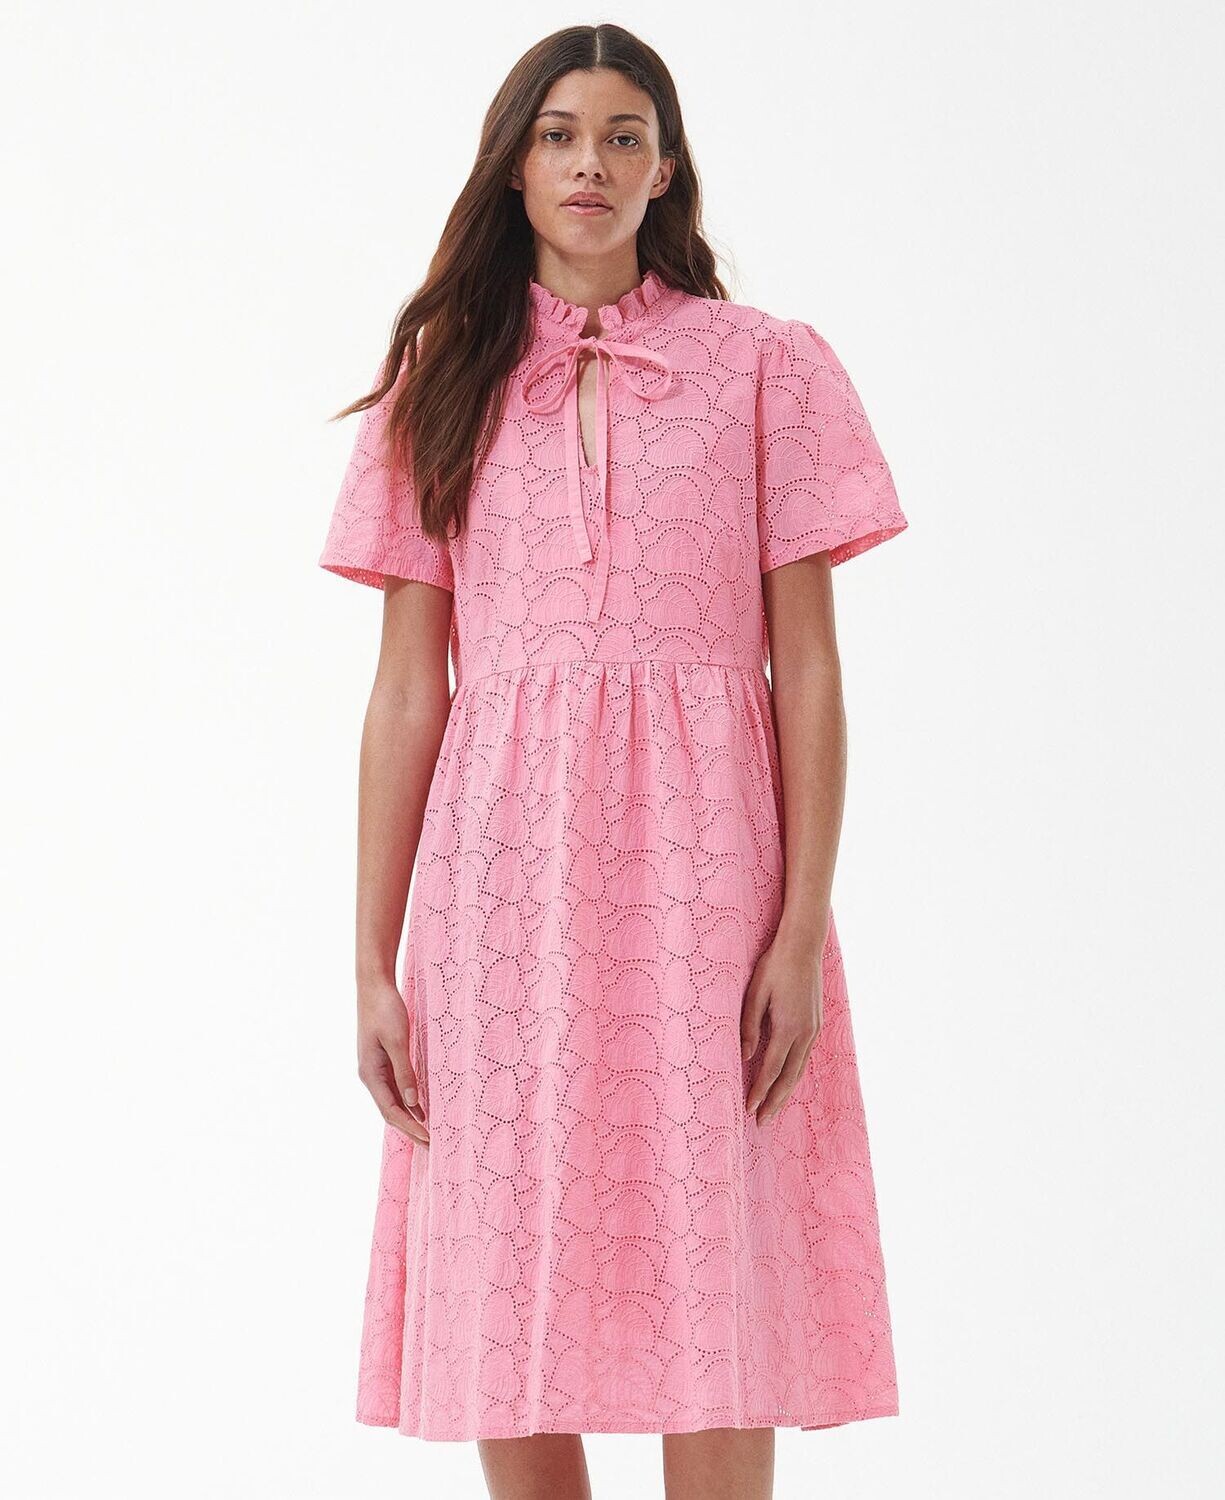 Barbour Robe Palmetto rose broderie, Tailles: 8